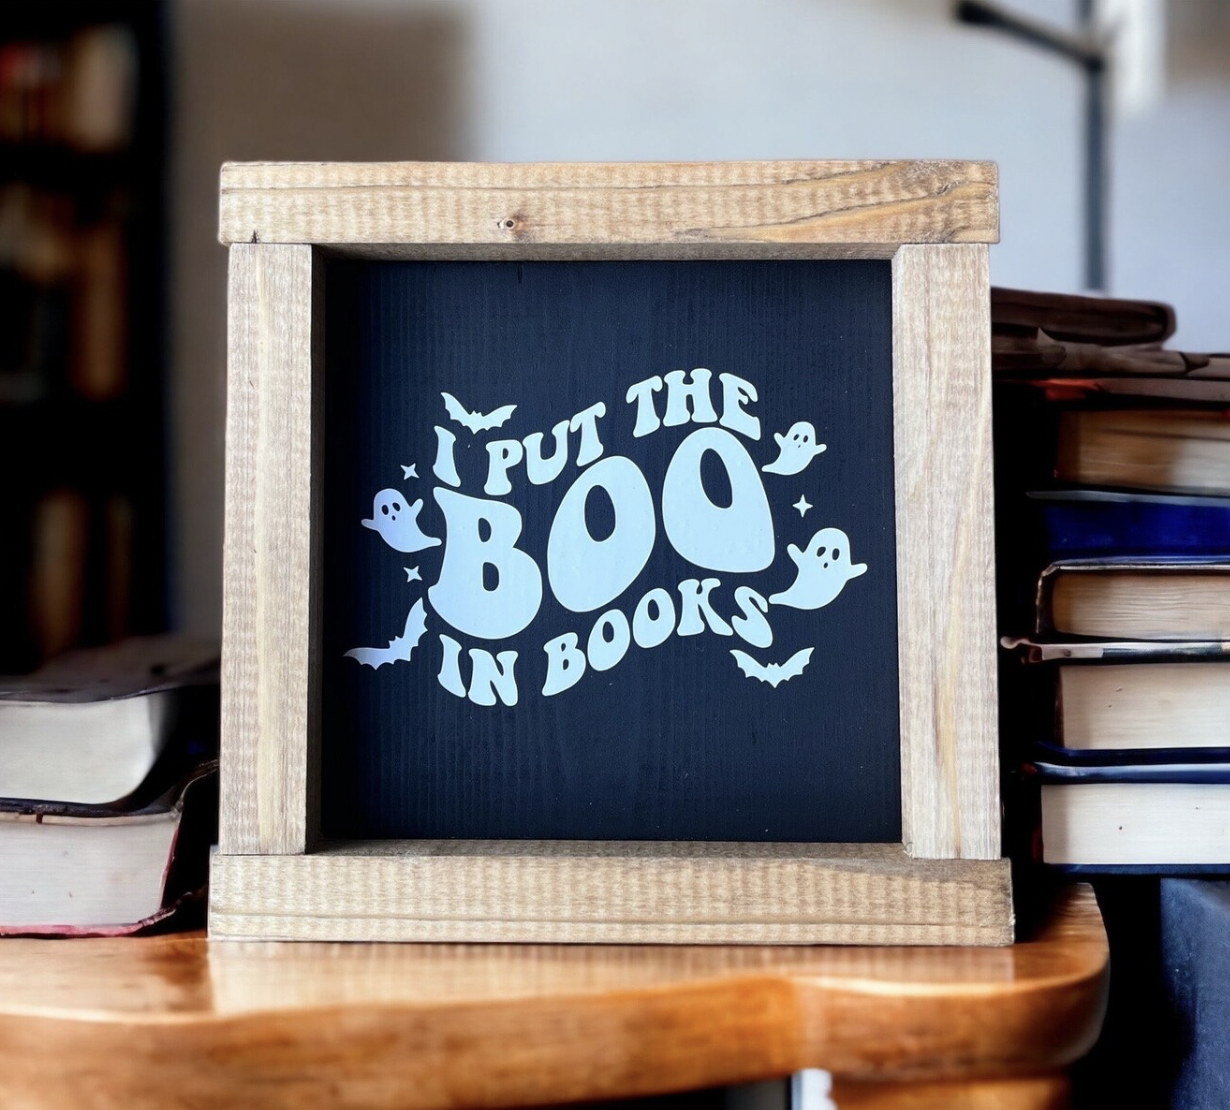 A small black sign with a wooden frame that says "I Put the Boo in Books"